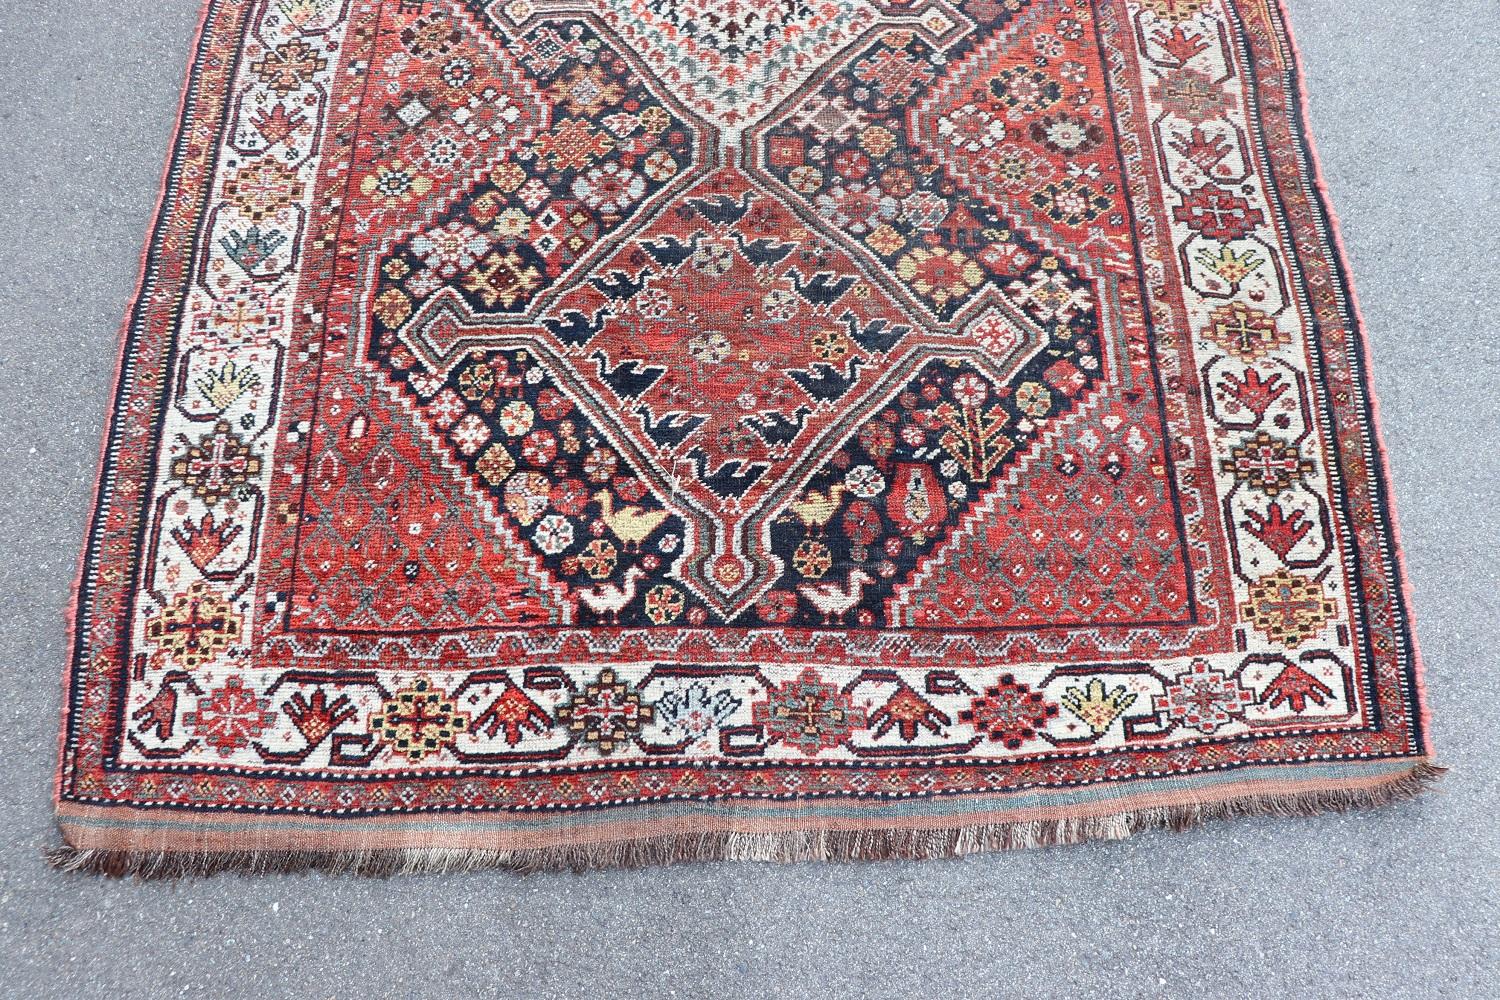 Beautiful 20th century ( 1950s circa)  persian shiraz rug handmade in wool and cotton warp. This fantastic rug it is in the main color red with a motif of central medallions with figures of birds. Used conditions.
   